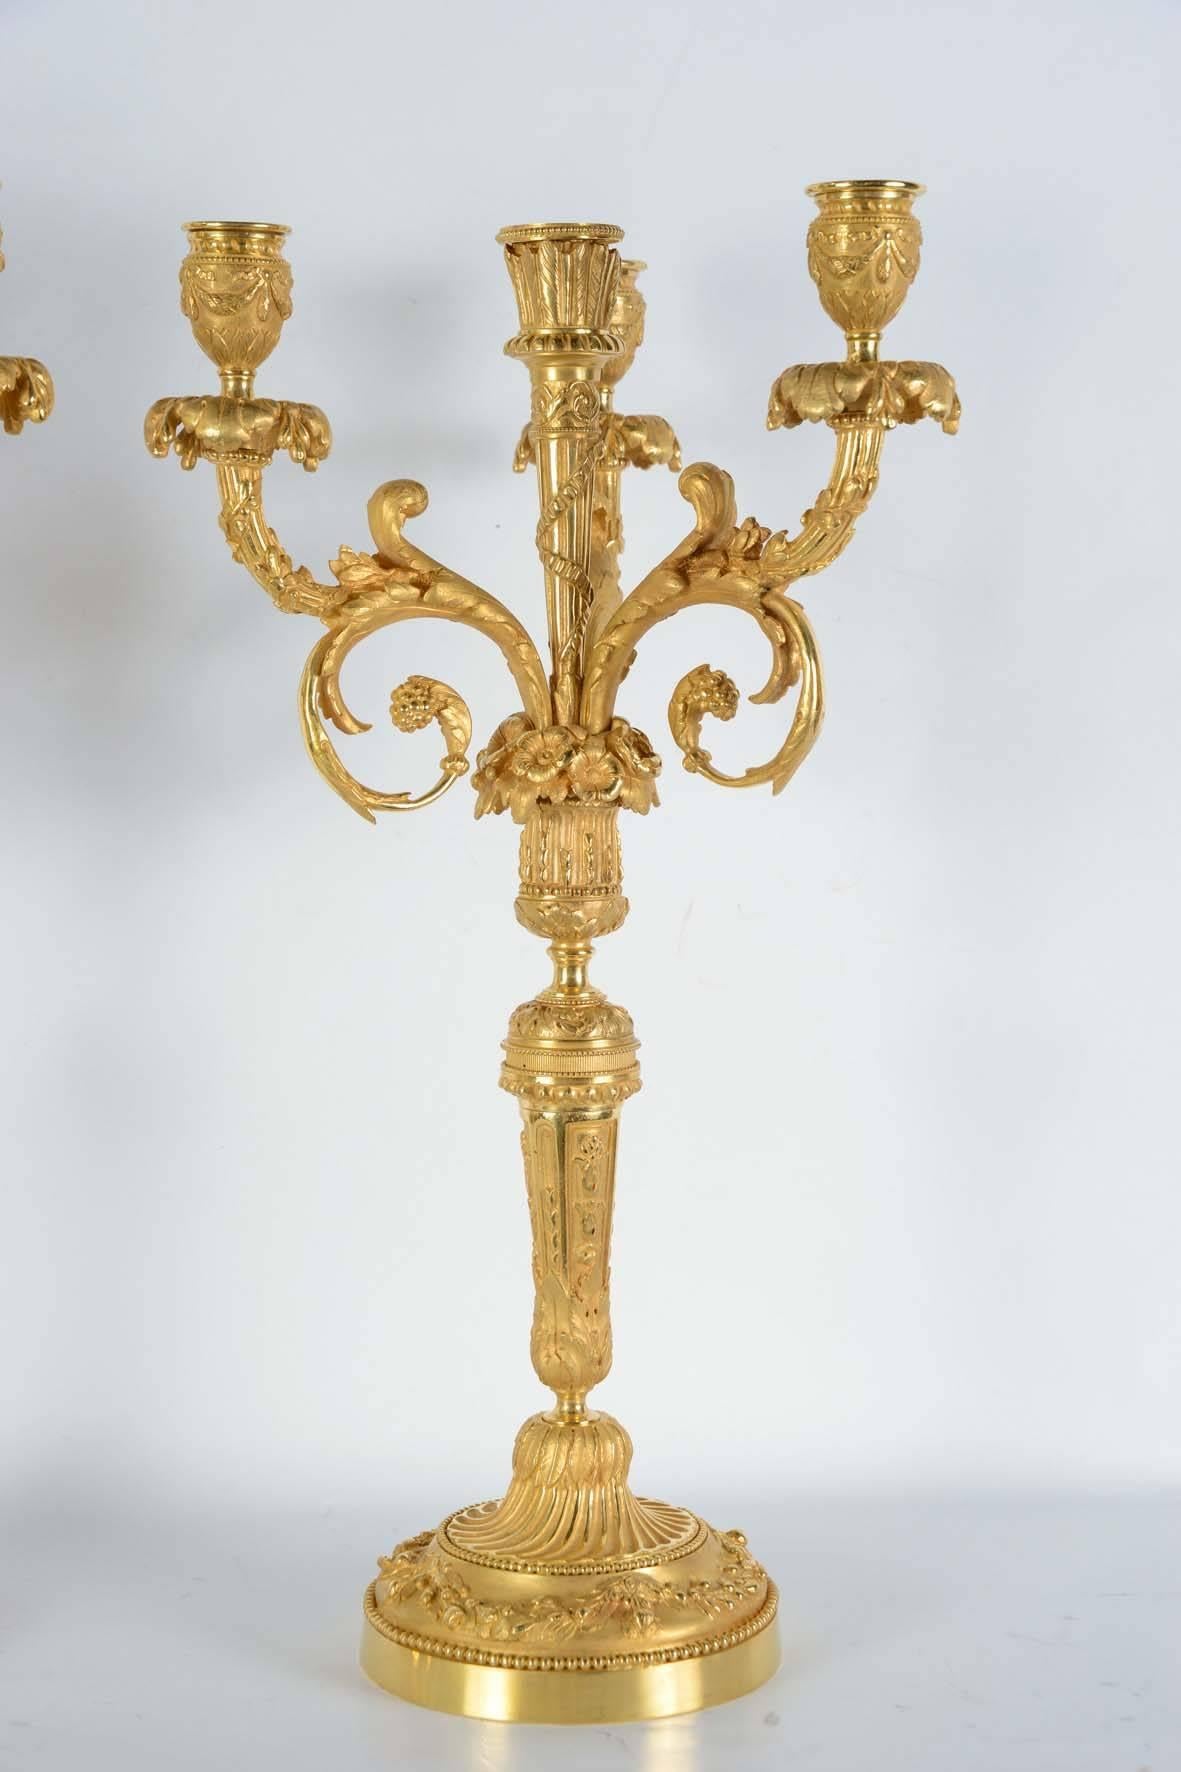 Pair of candelabras in bronze gilded with real gold.
Very well chiseled, four arms of lights
Measures: Diameter of the base 6 